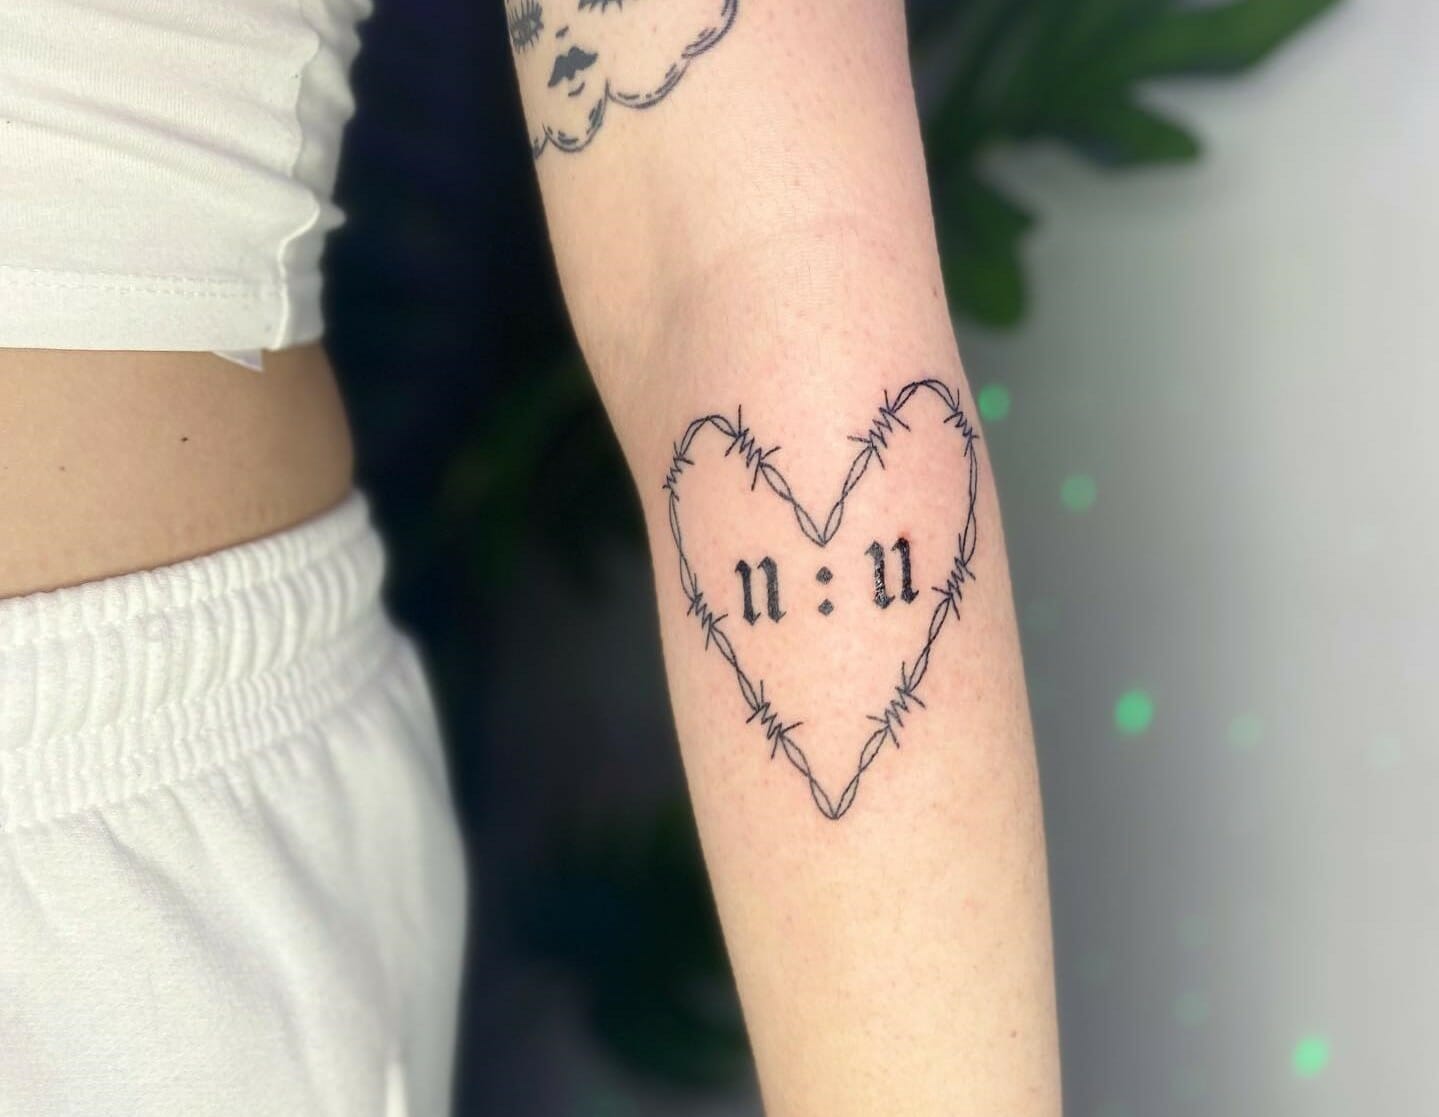 1111 Tattoo Ideas That Show Your Connection To The Universe